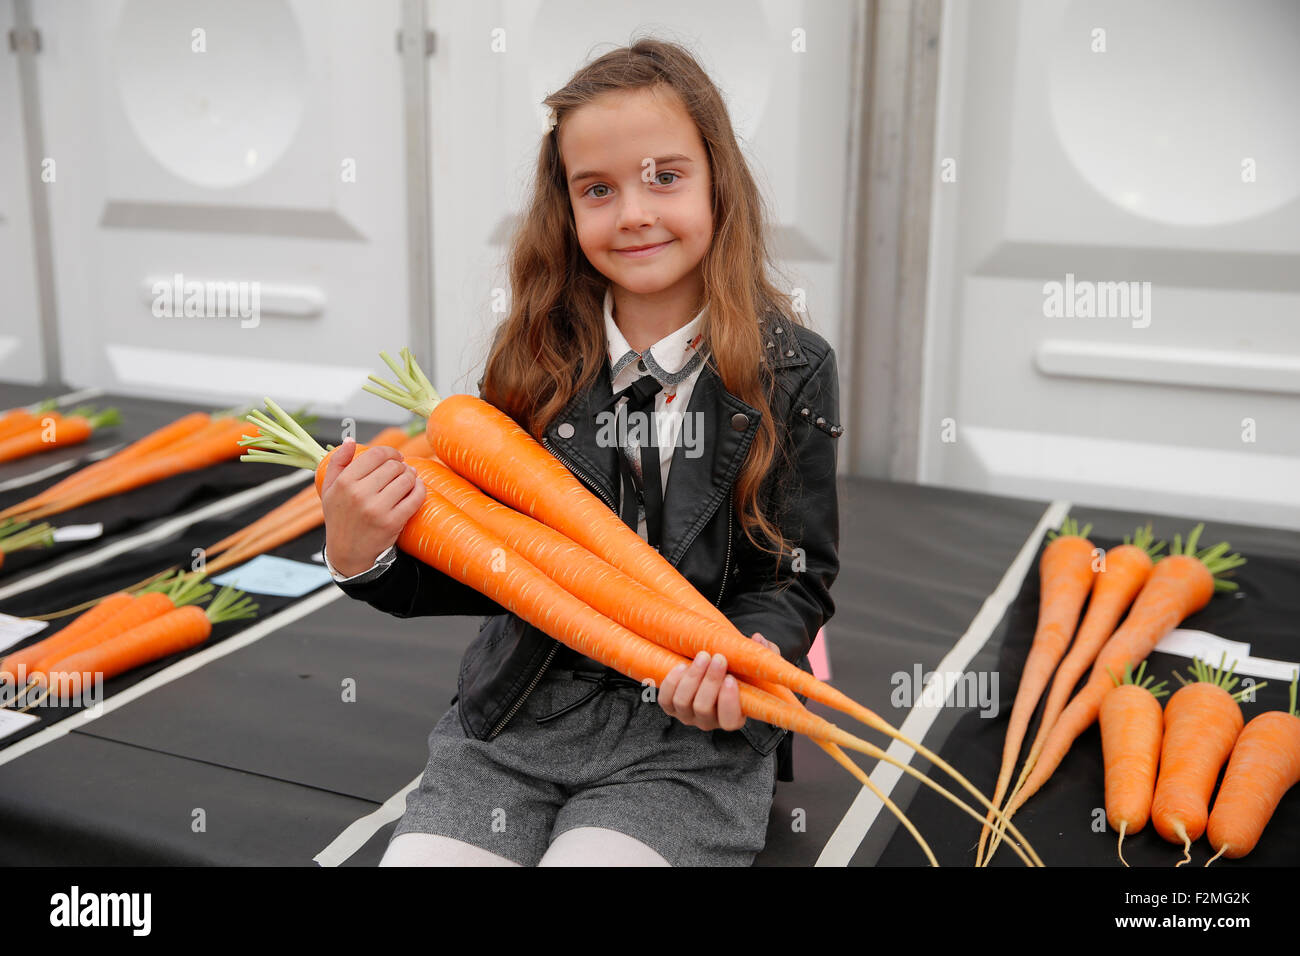 Amelia with the winning long carrots at The UK Carrot Championships held at The Harrogate Flower Show 18th, 19th and 20th Septem Stock Photo